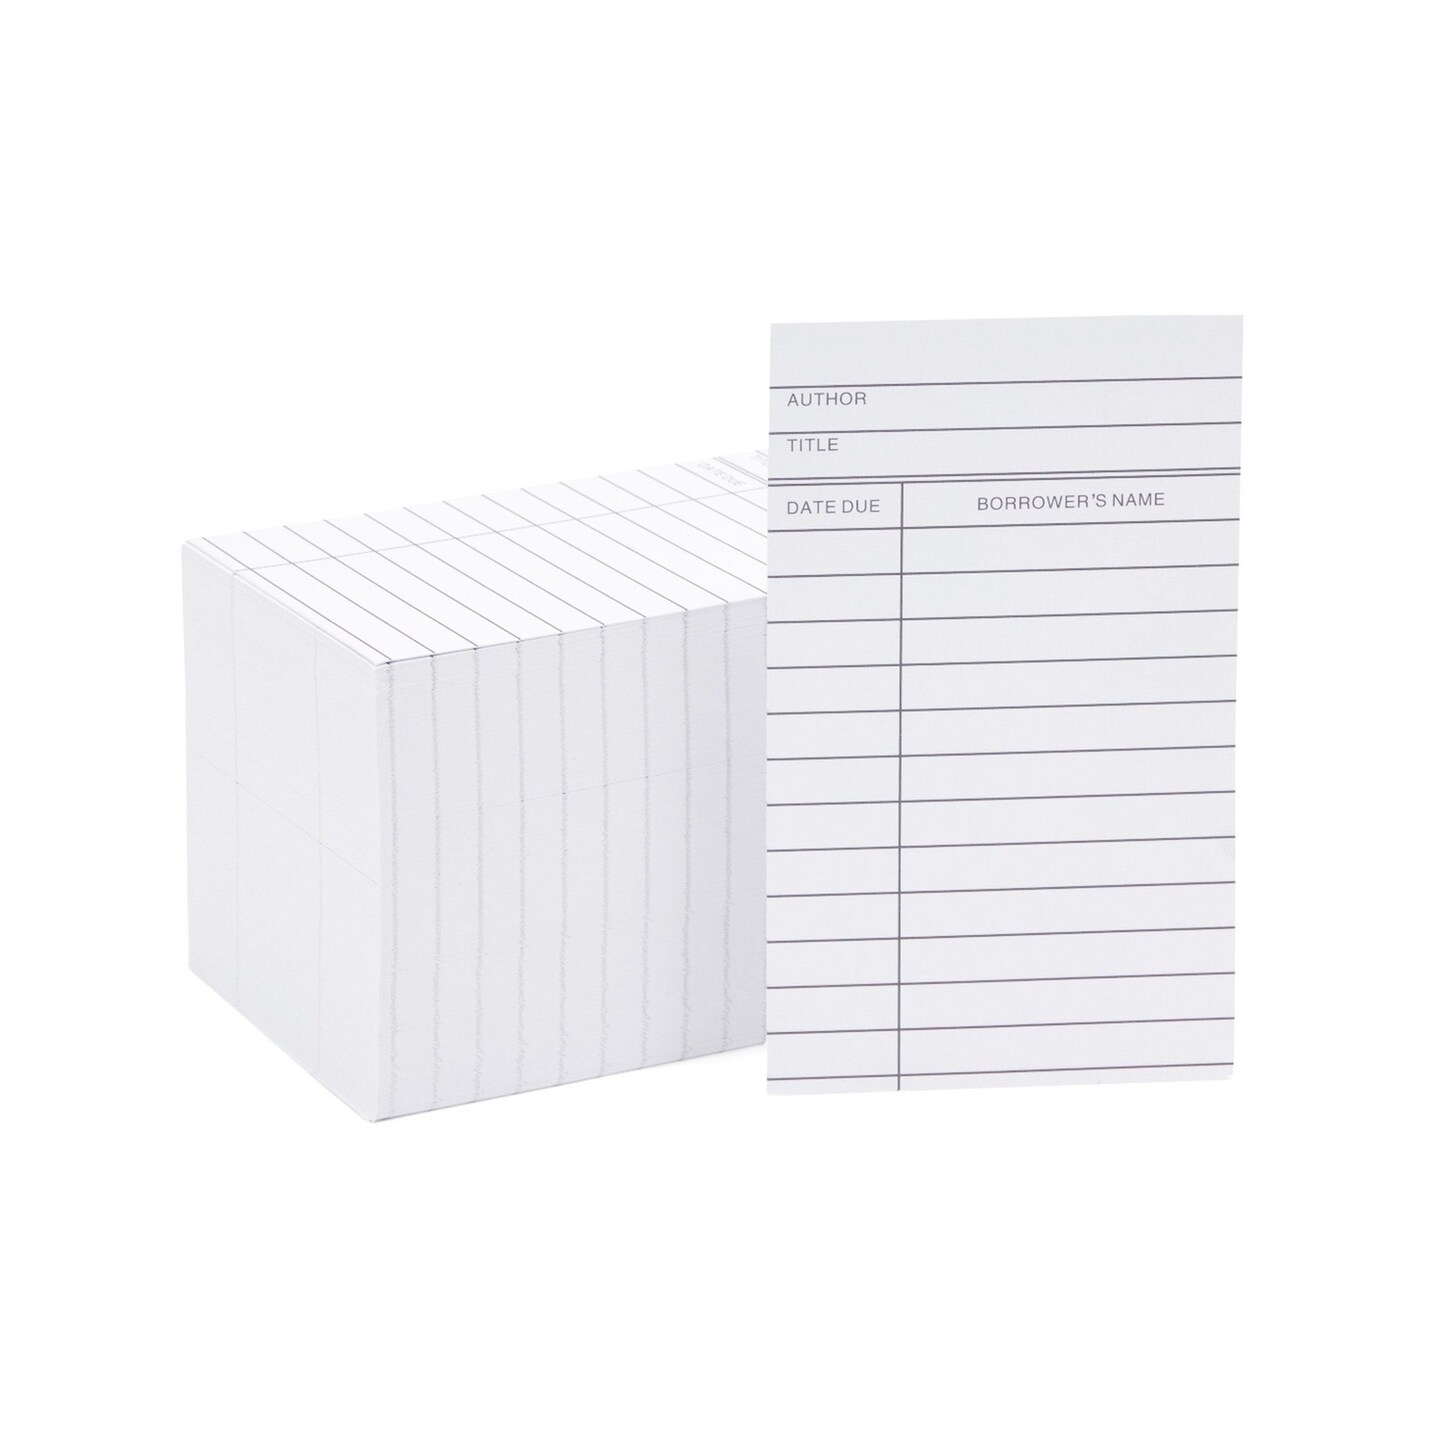 250-Pack Blank Library Cards for School Book Checkouts, CDs, DVDs, Vinyl Records, Classroom Supplies, Record Keeping, Tracking, Organizing, Storage, Vintage-Style, White (3x5 in)